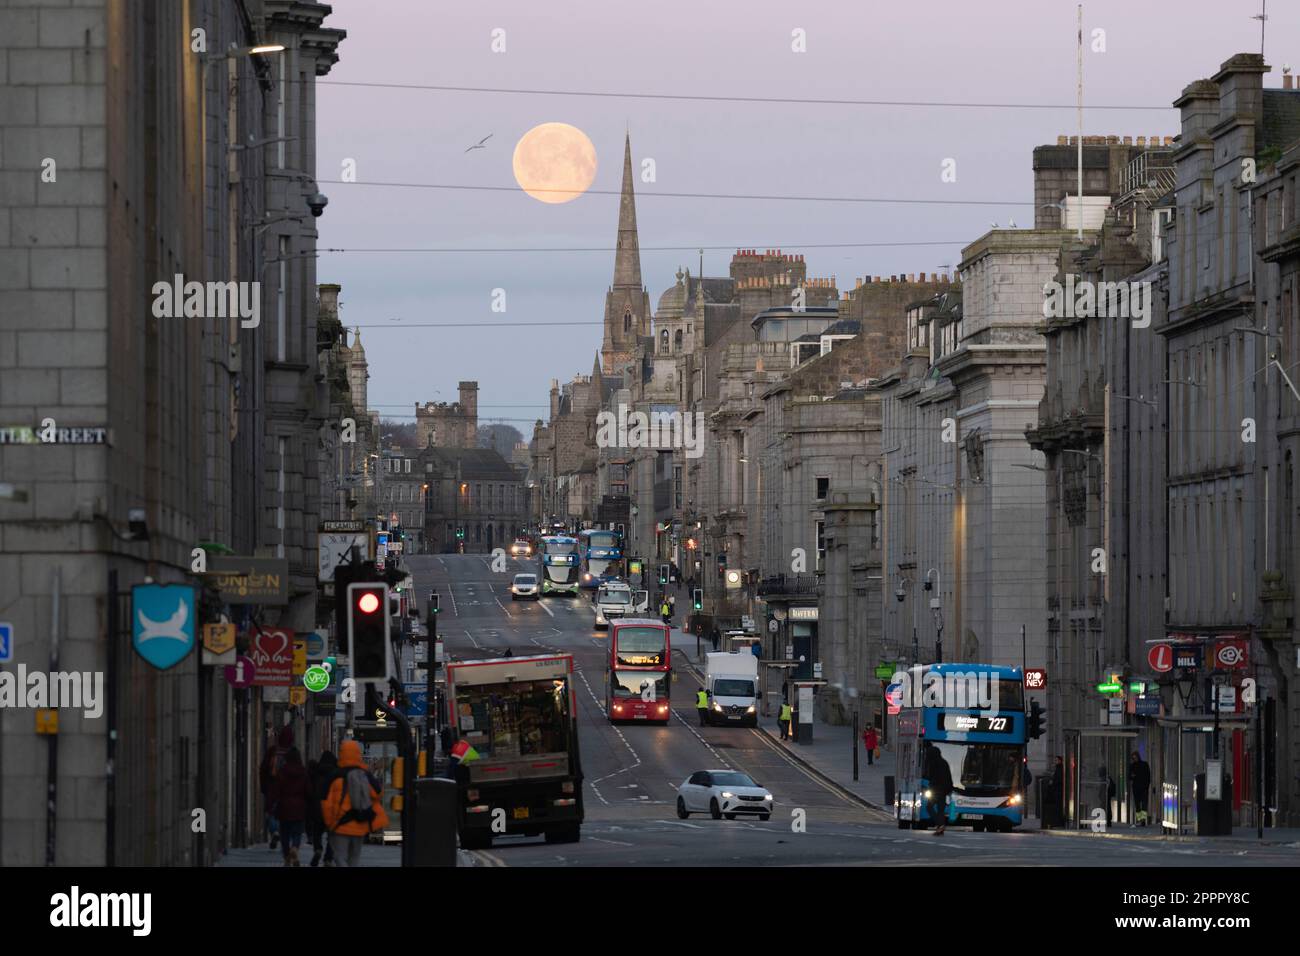 Looking West Along Union Street in Aberdeen City Centre as the Full Moon Sets Behind Gilcomston Church Spire Early on an April Morning Stock Photo